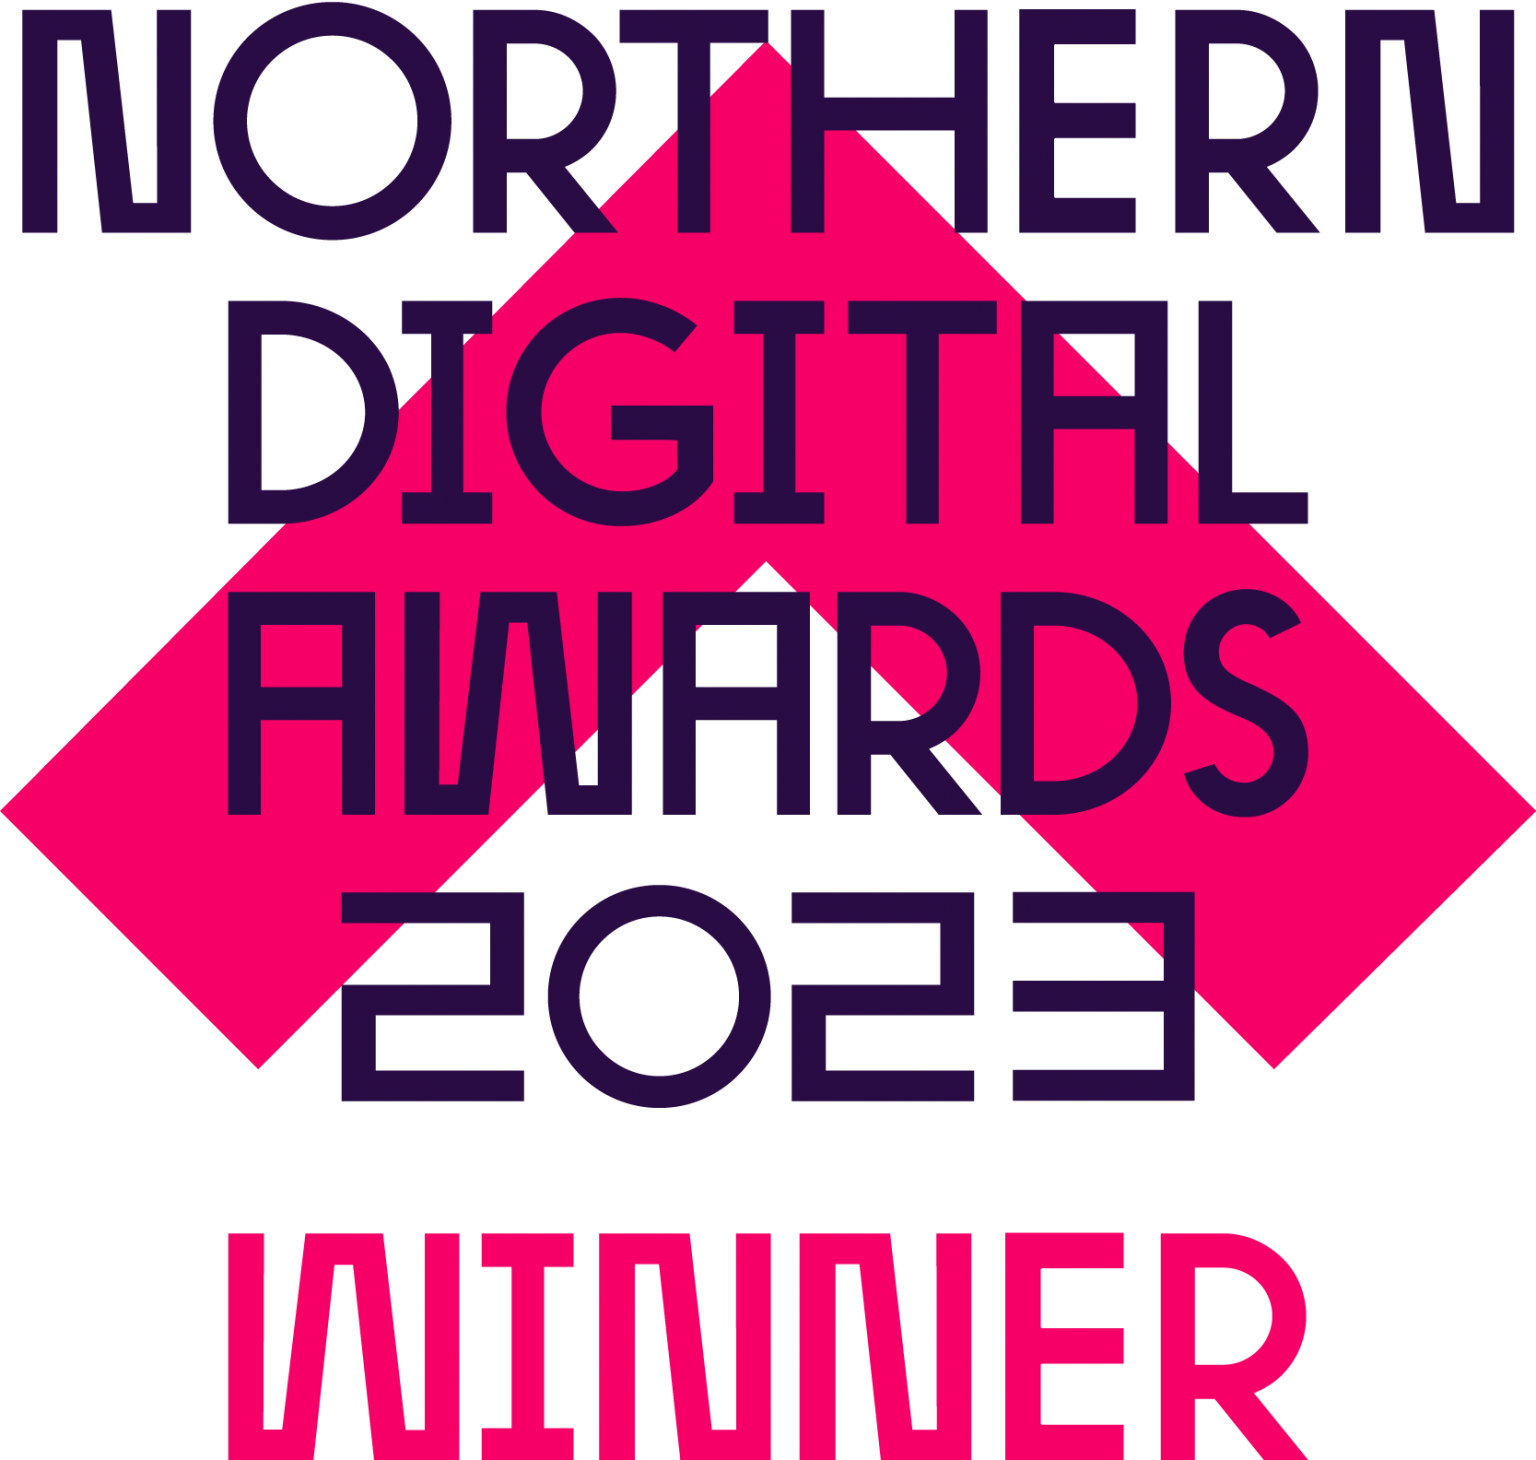 Winners at this years Northern Digital Awards